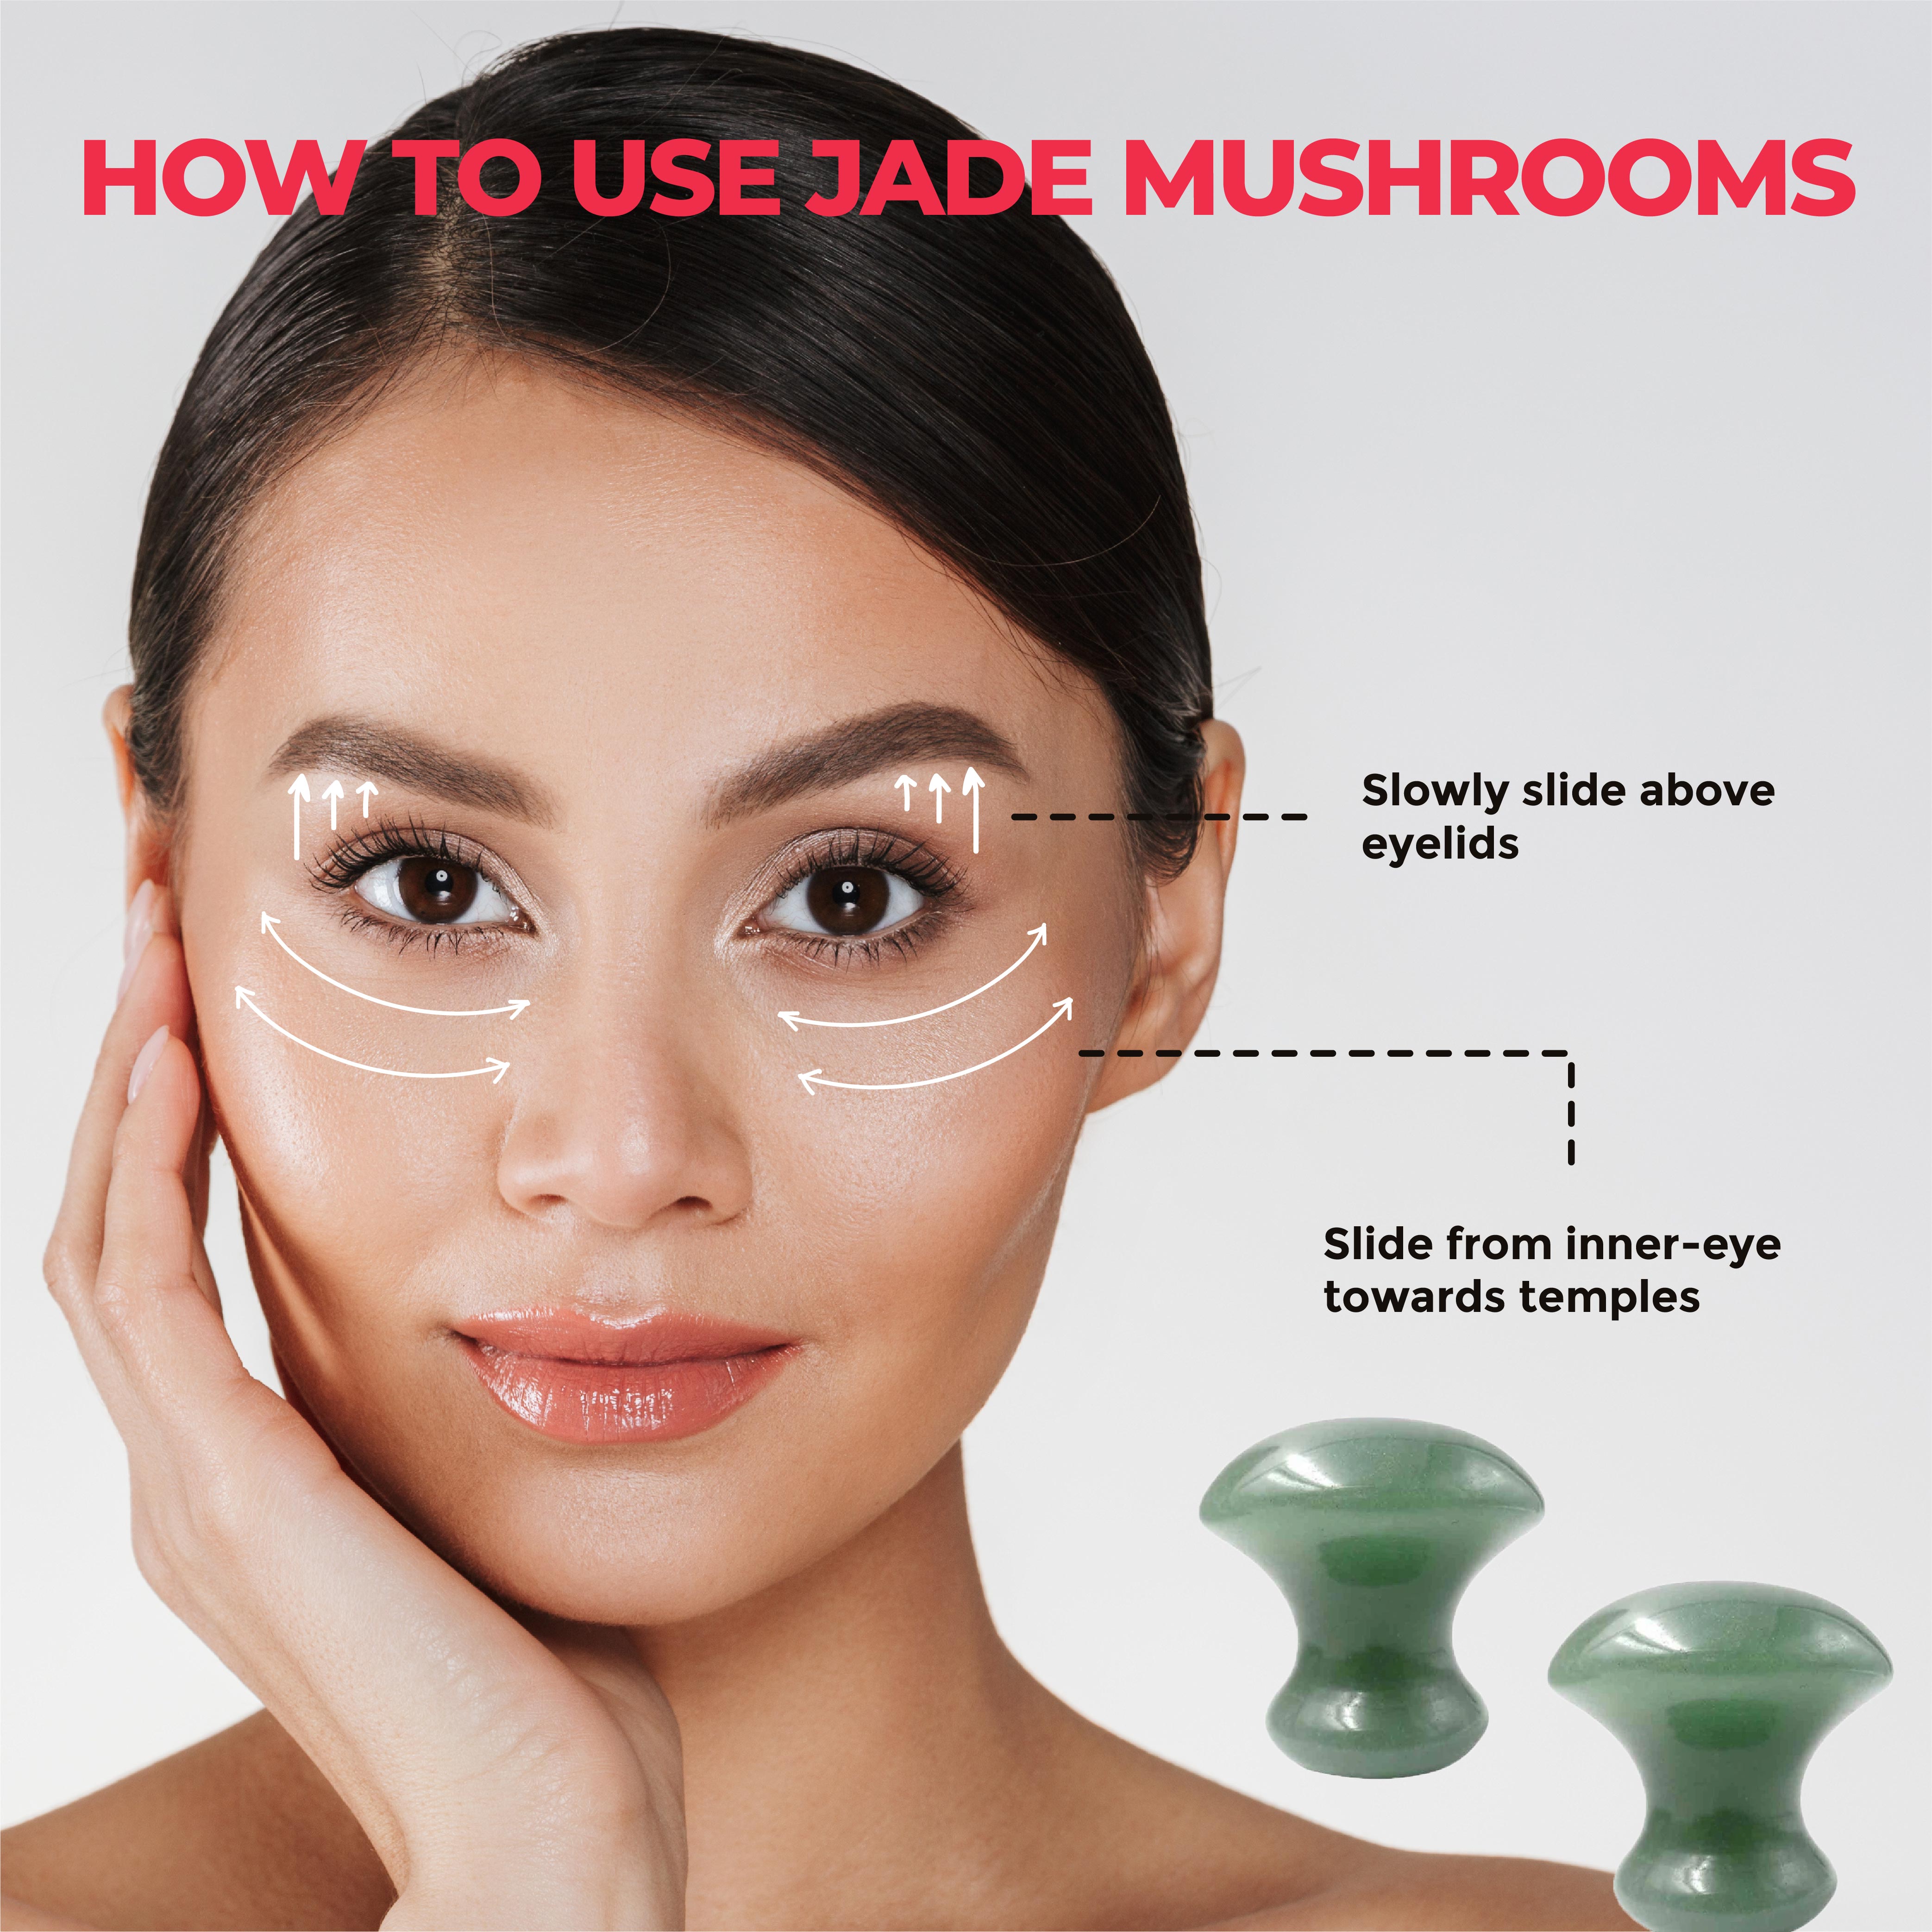 This is an image of how to use the House of Beauty Jade Mushrooms